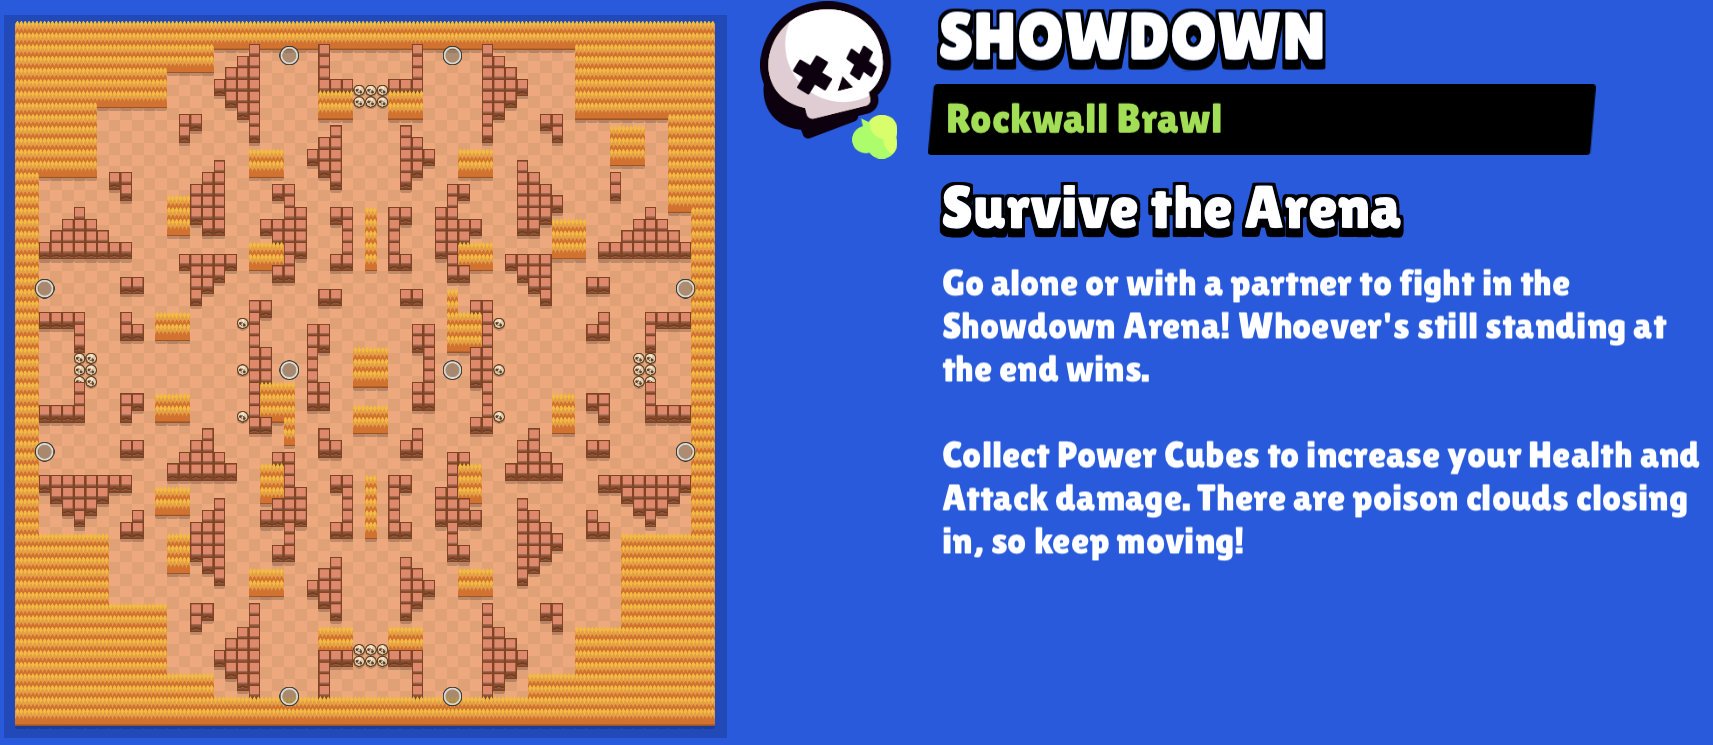 Code Ashbs On Twitter Rockwall Brawl Showdown Is Today S Map For Power Play Here Are The Best Brawlers To Use Crow Extra Toxic Leon Invisiheal 8 Bit Extra Life Shelly Band Aid Carl - brawl stars map tellereisen